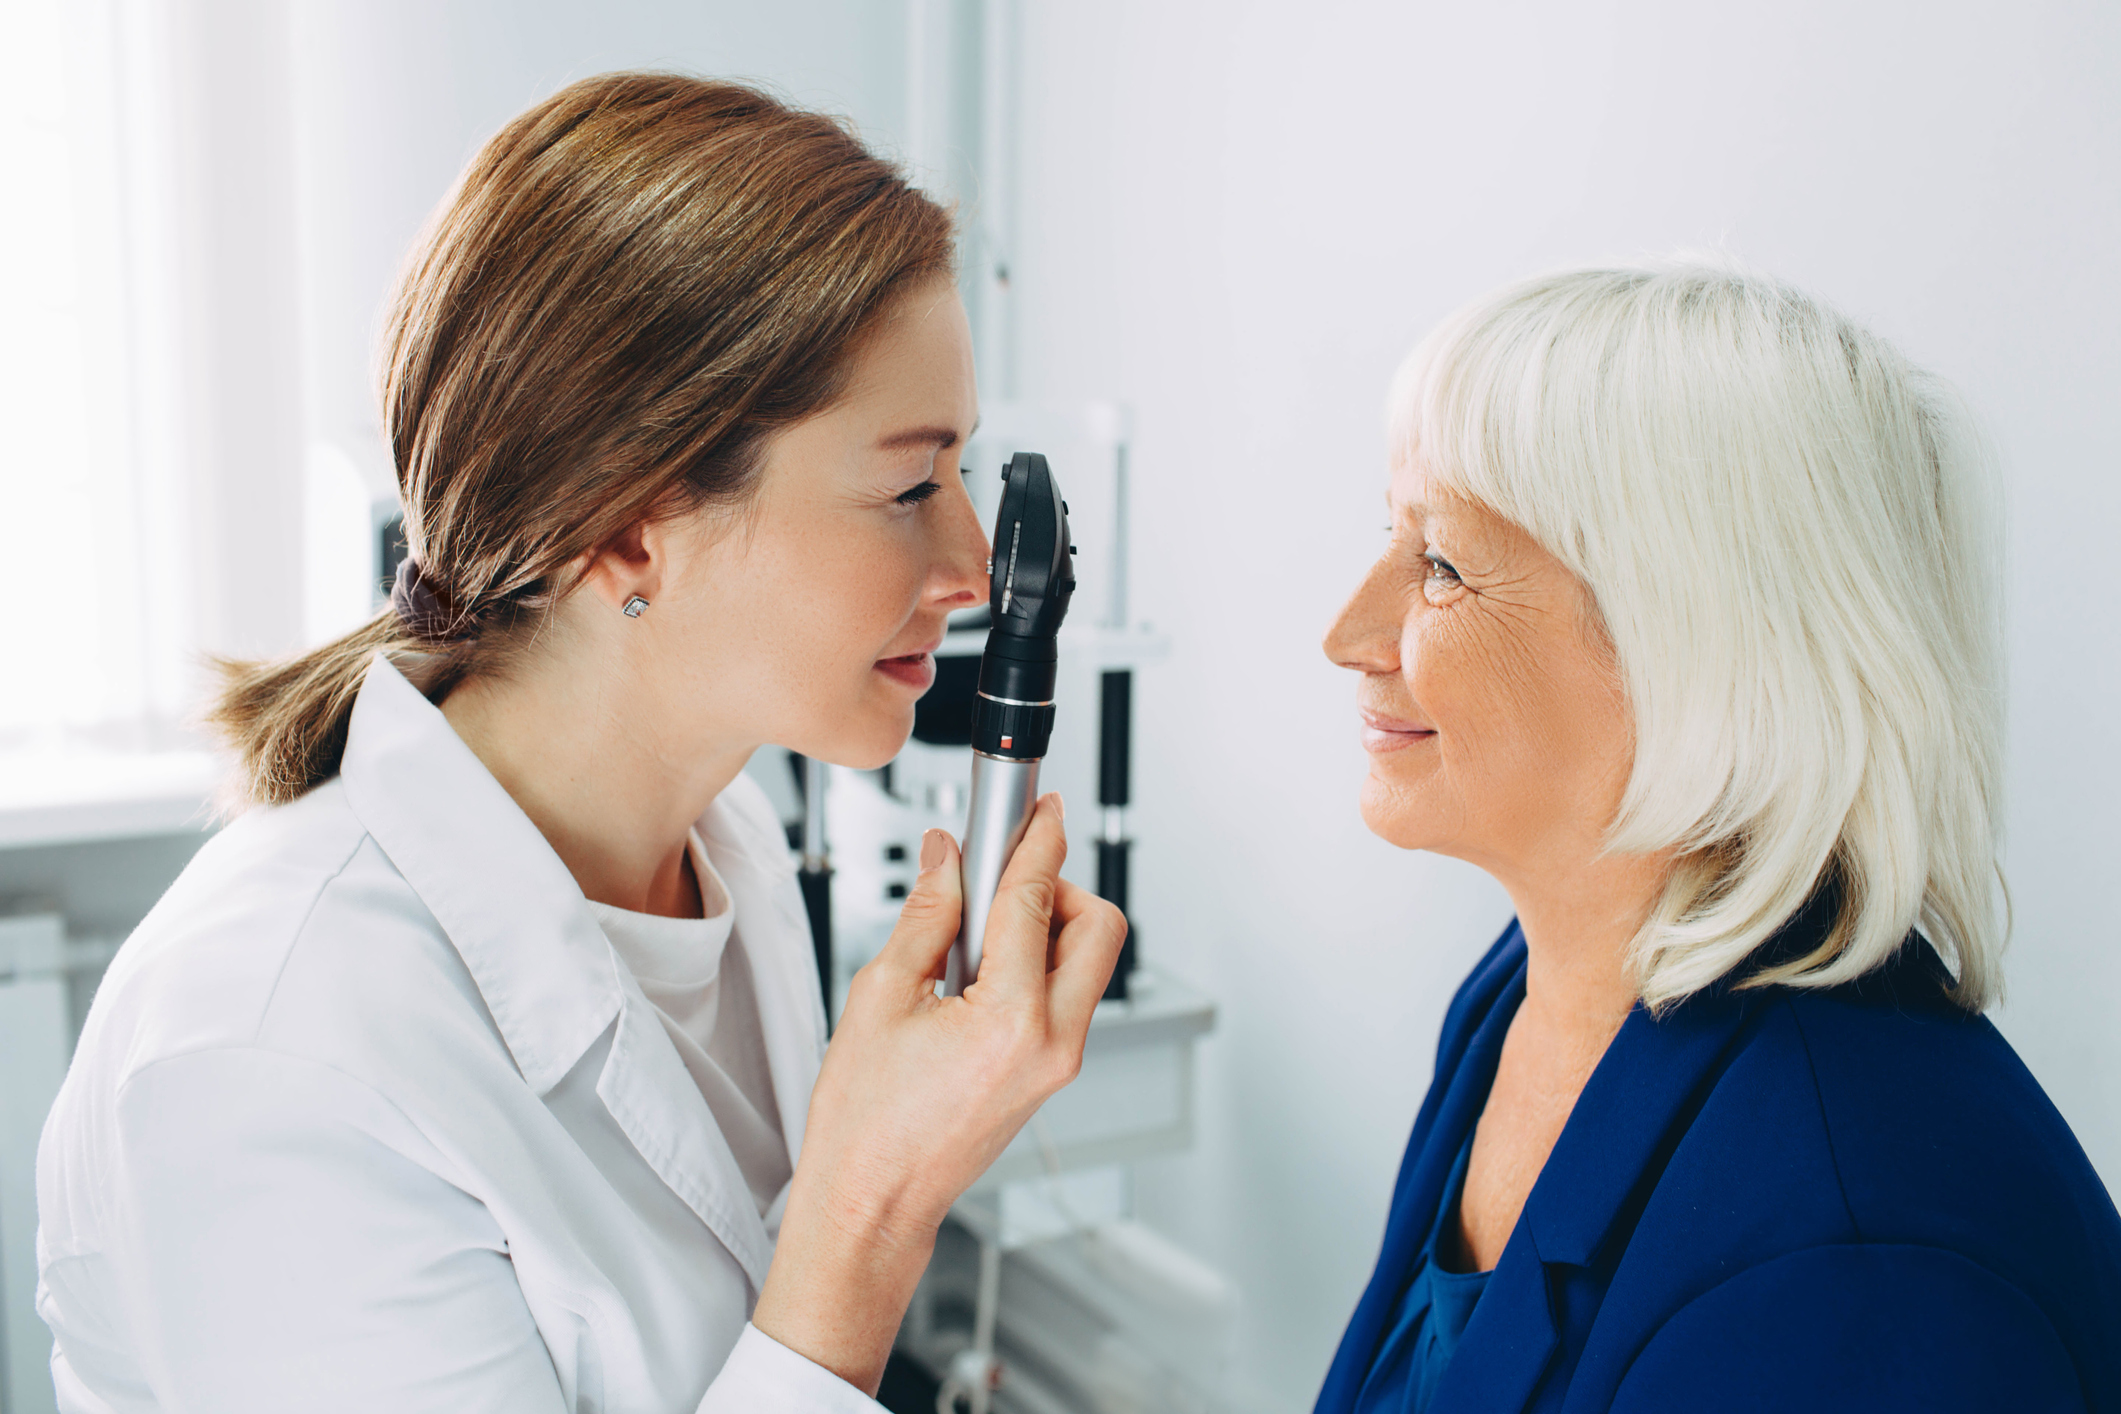 Remember to schedule your annual dilated eye exam and ask your doctor about AMD.